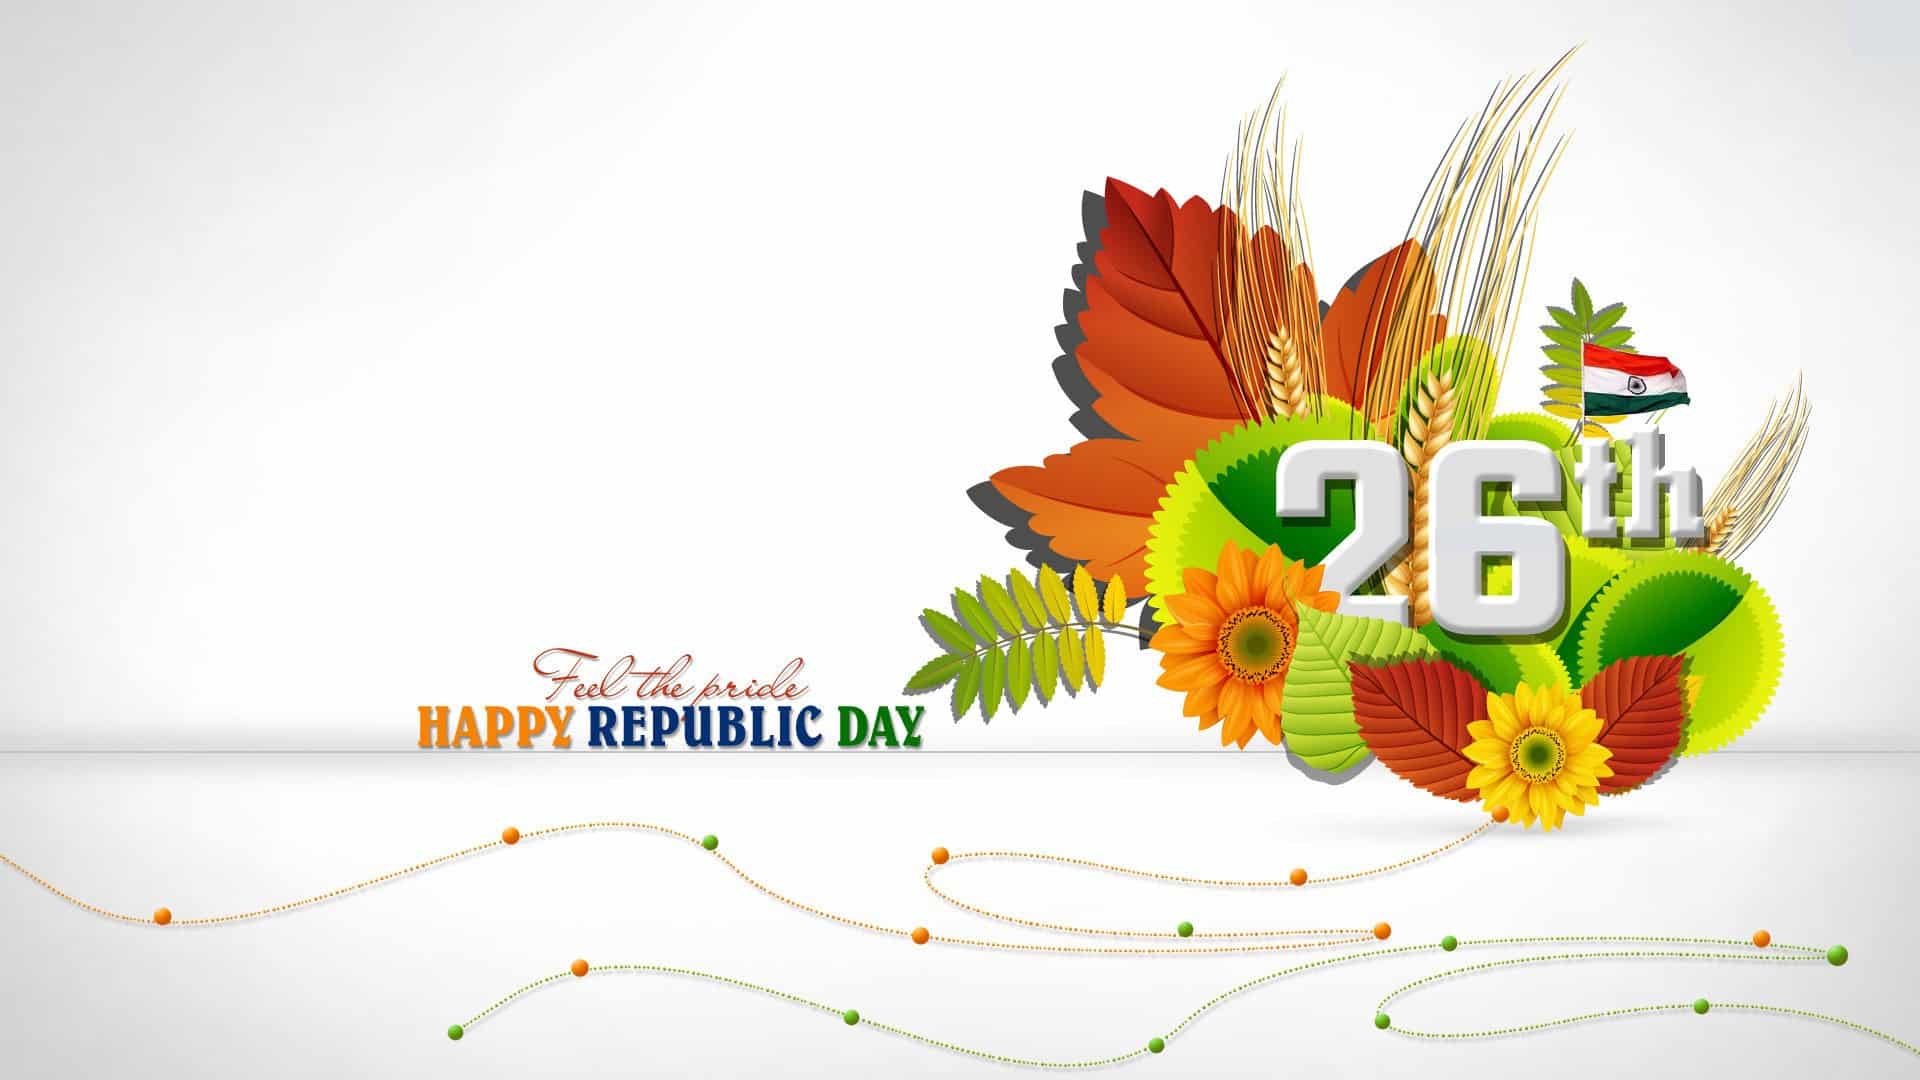  Republic Day Quotes by Great Personalities 2022 – Check Here Online